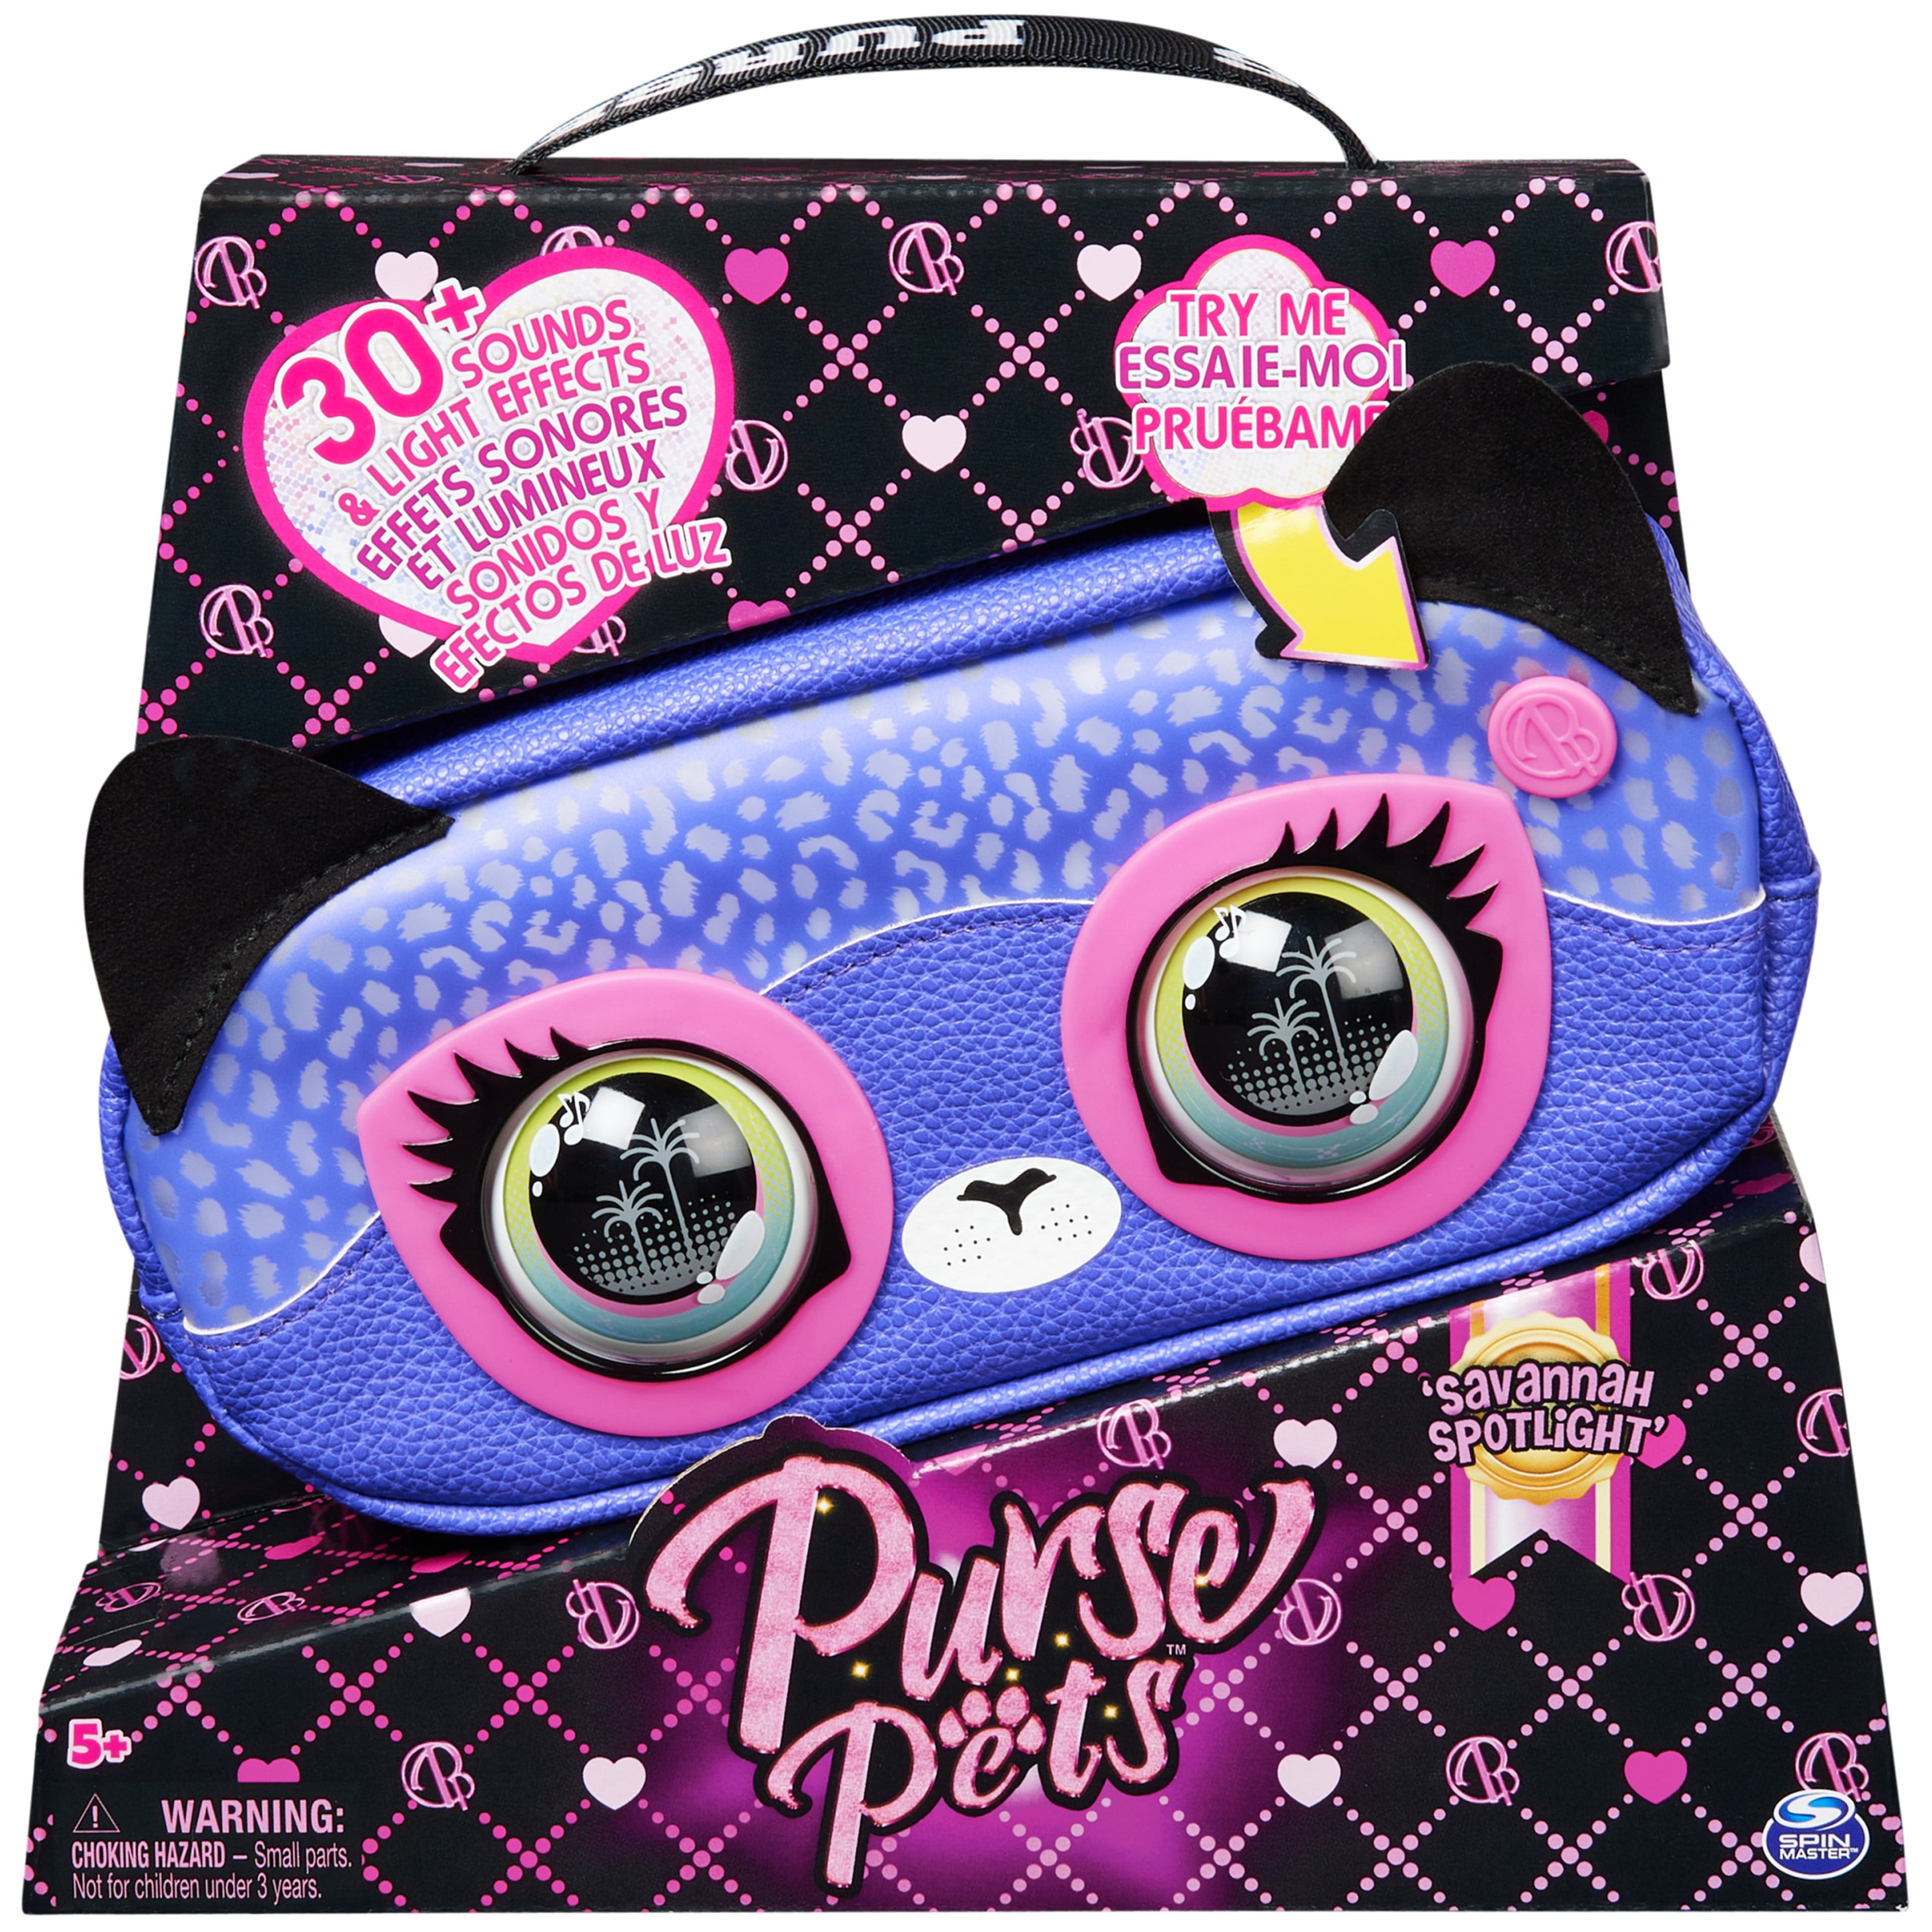 Purse Pets, Savannah Spotlight with over 30 Sounds and Light Effects 